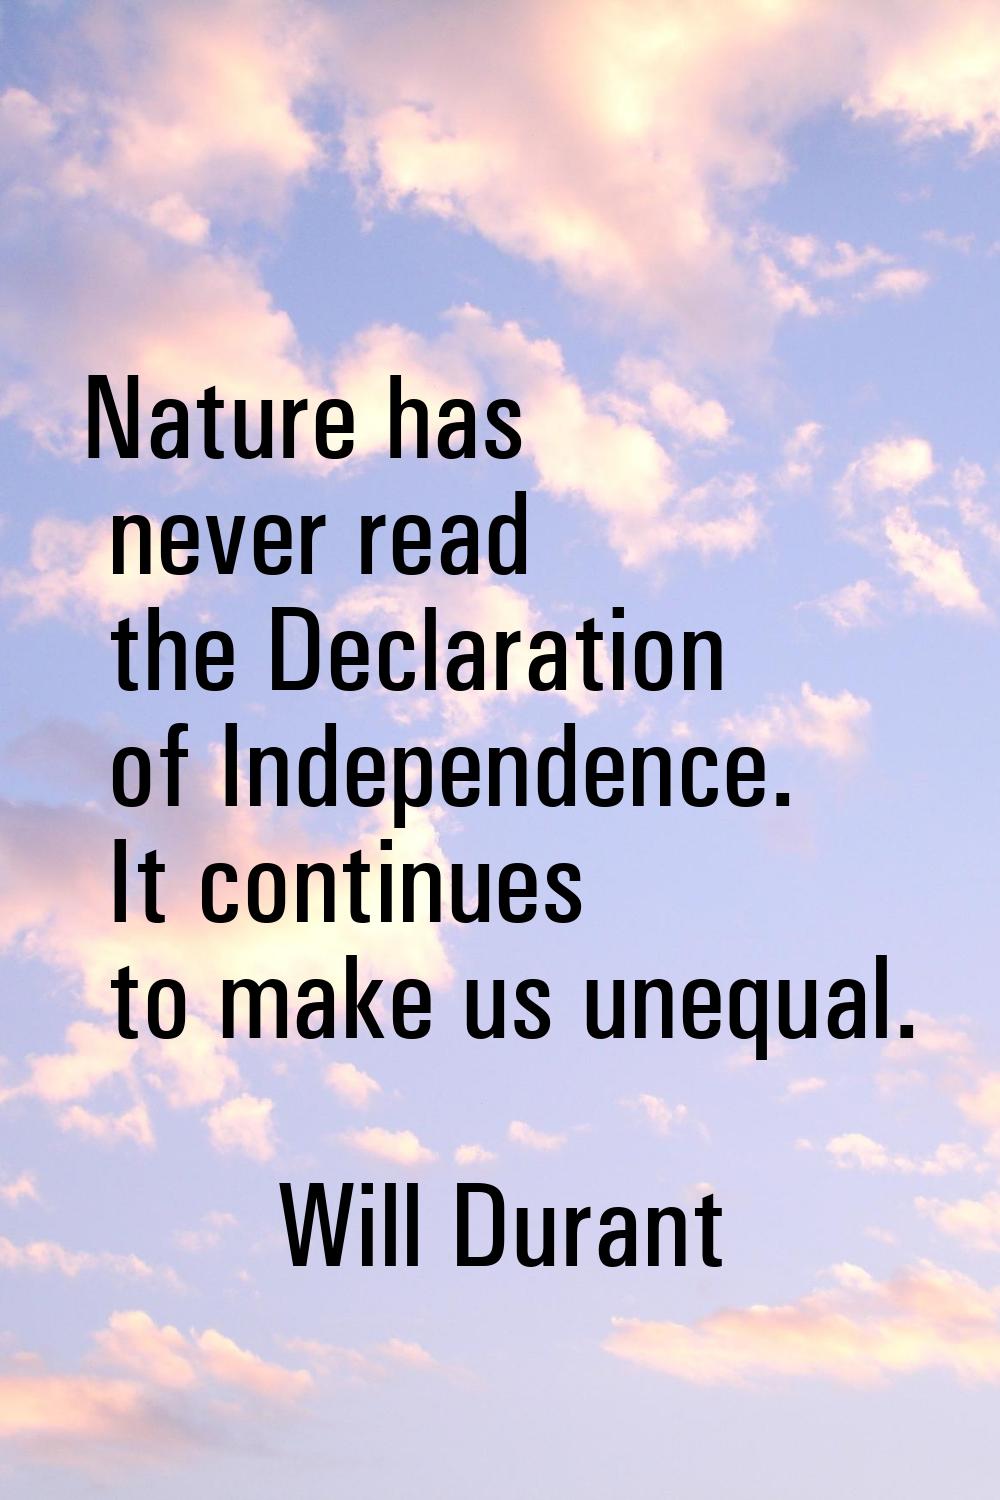 Nature has never read the Declaration of Independence. It continues to make us unequal.